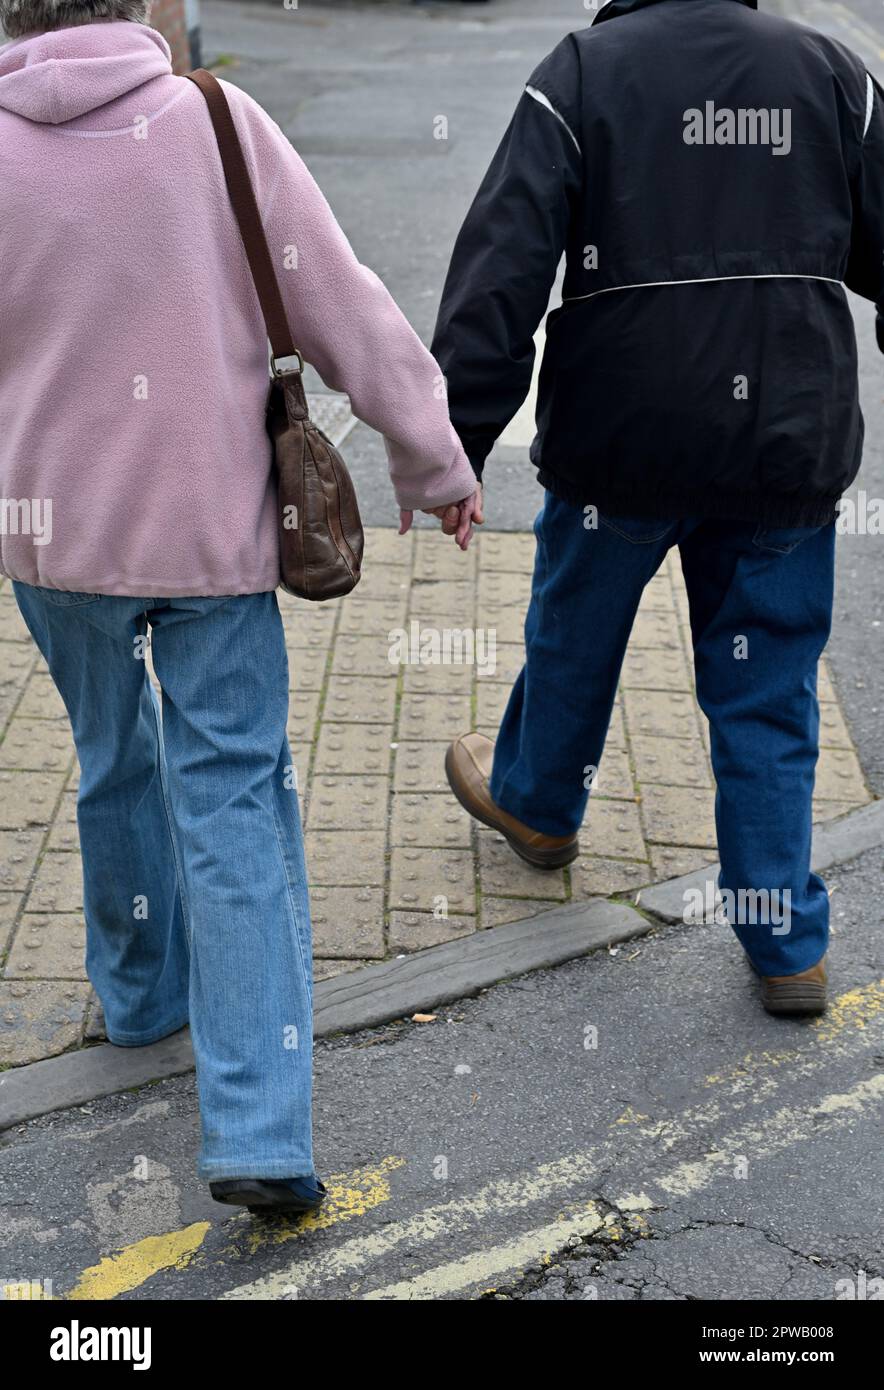 Older couple walking away along road, pavement, holding hands Stock Photo